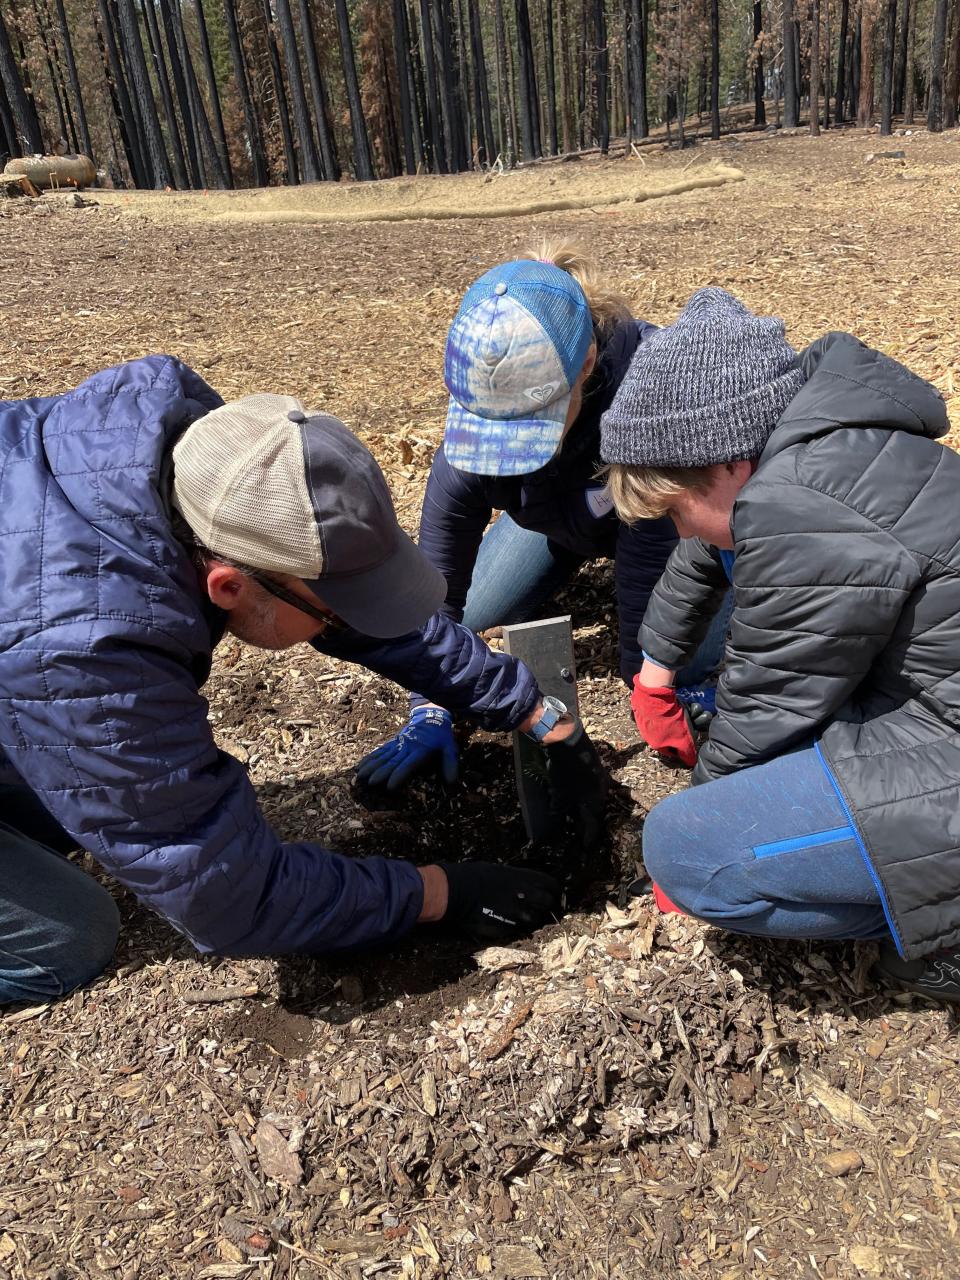 Summer in Plumas County, 2022: Volunteers with Friends of Warner Valley community group plant trees on private properties in the Warner Valley that were damaged by the Dixie Fire in 2021.